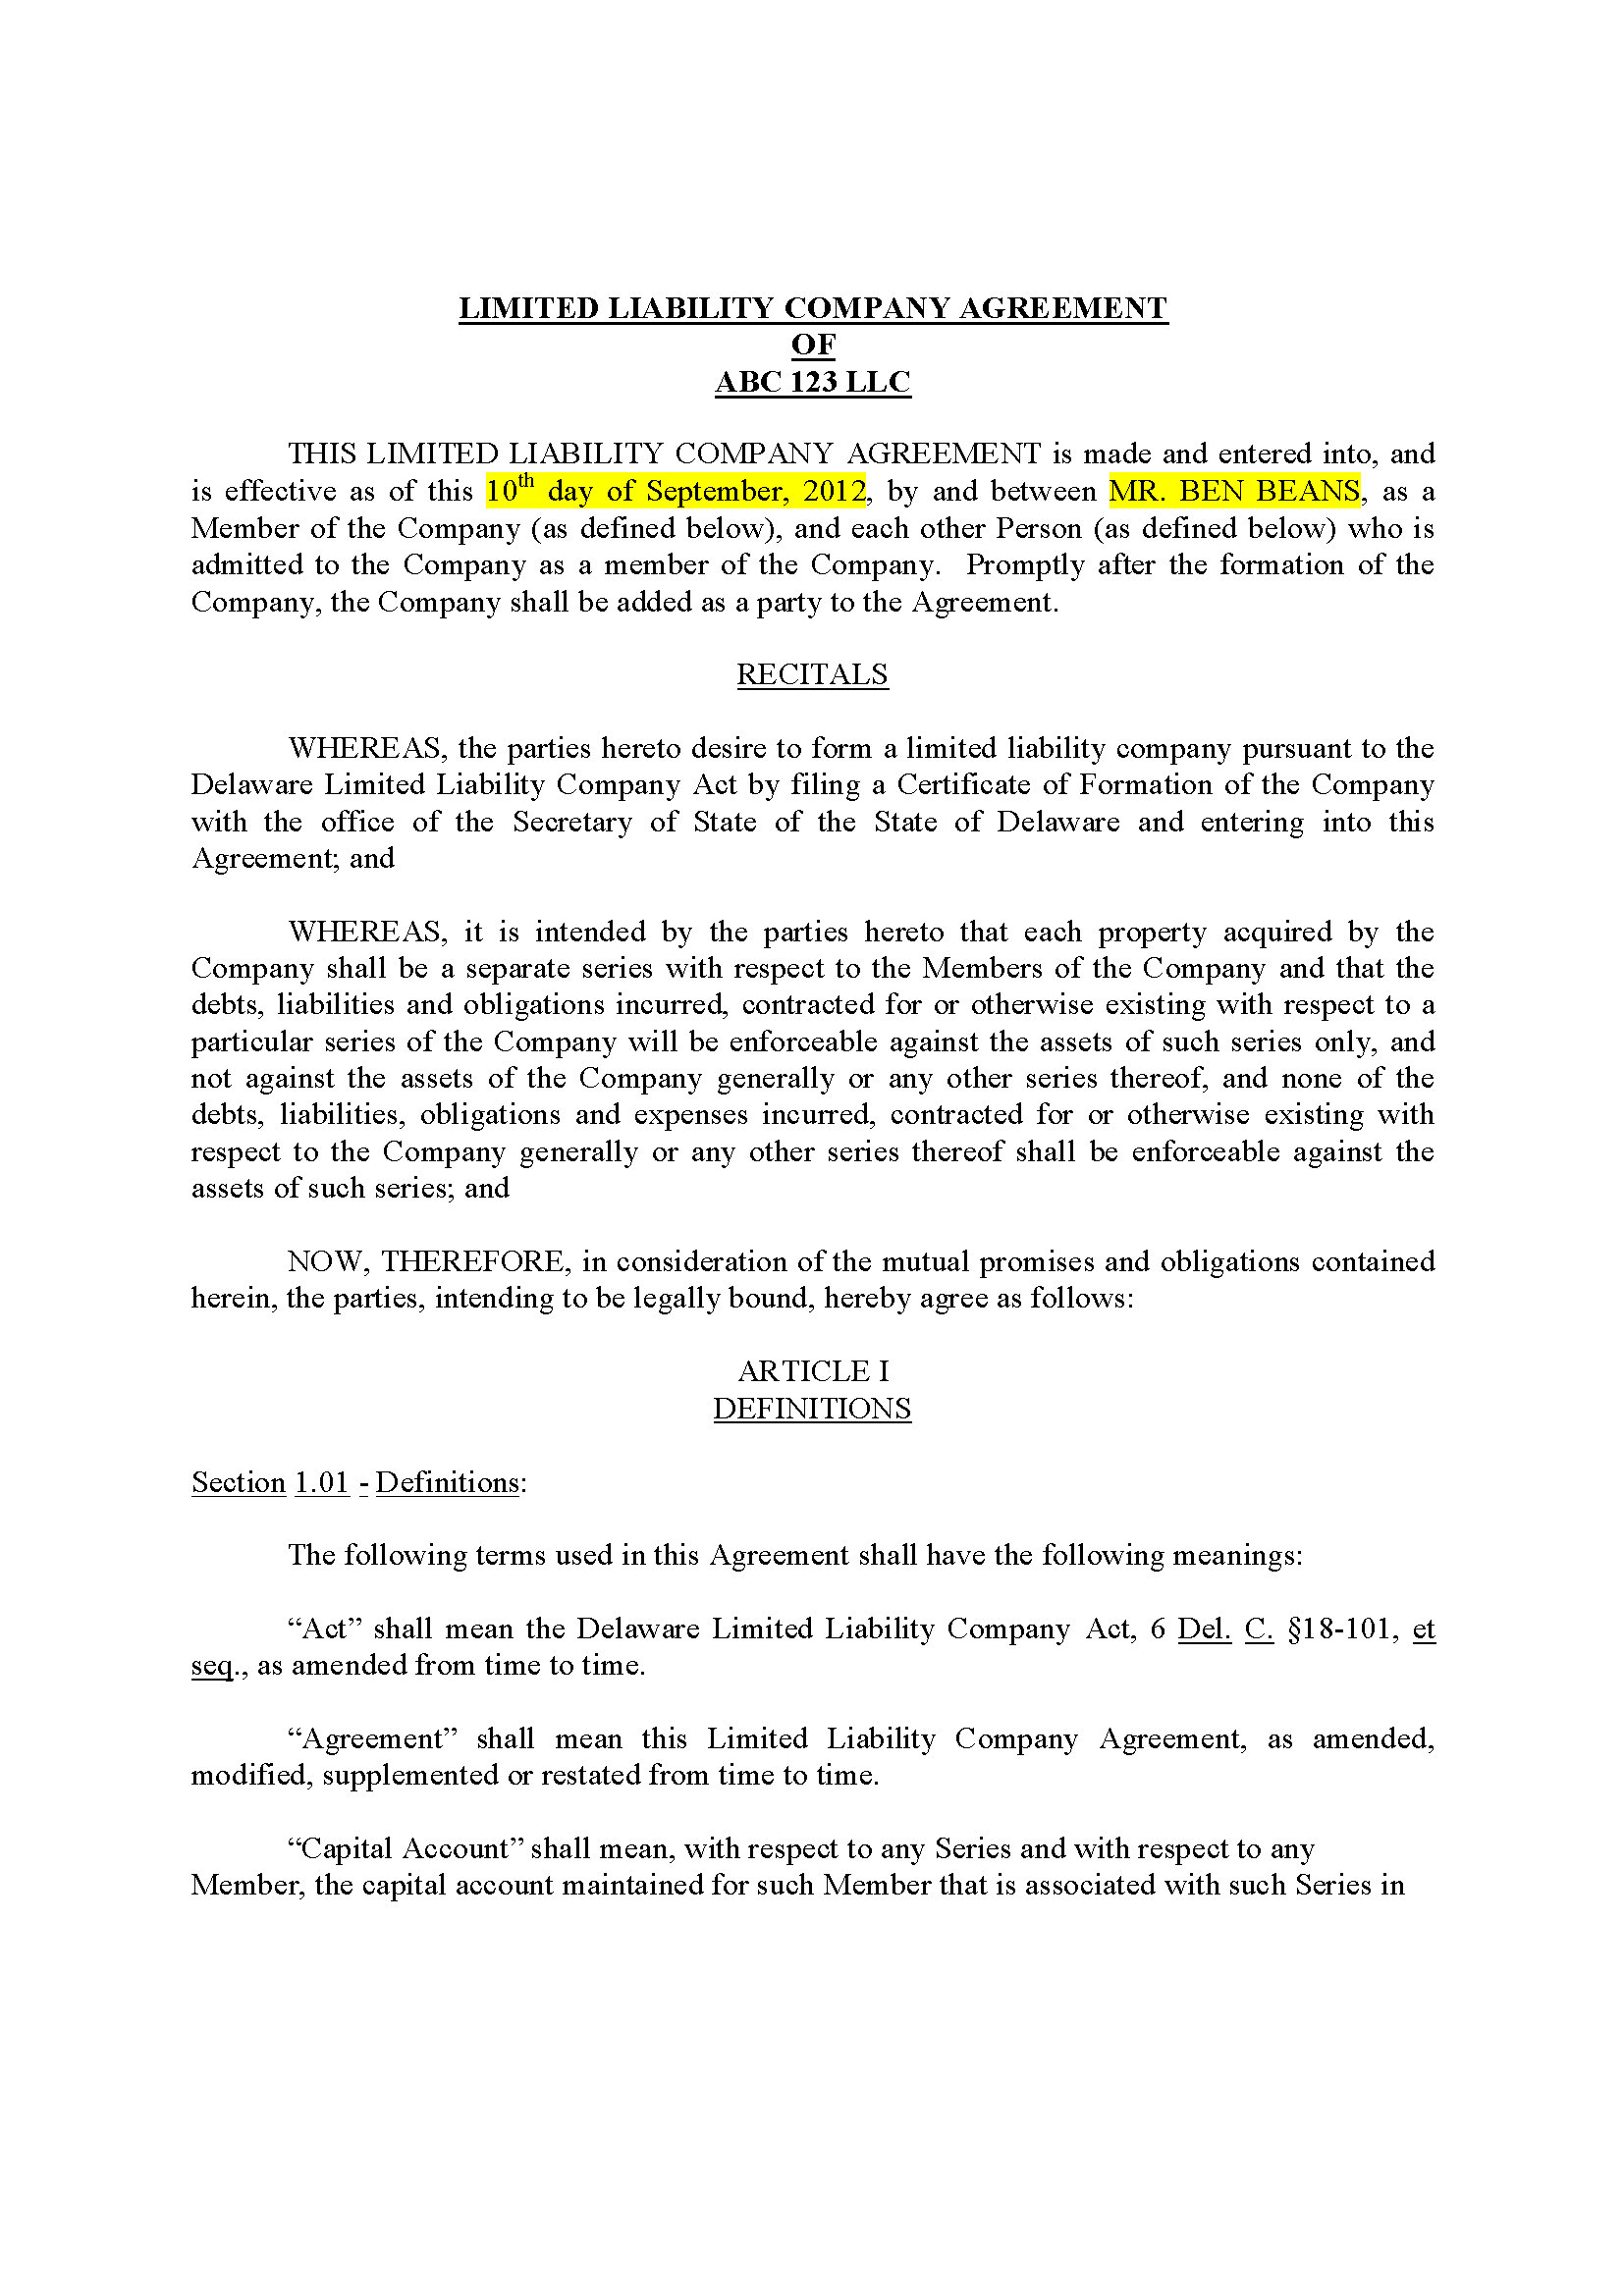 North Carolina LLC Operating Agreement (39 pg)Private Placement 